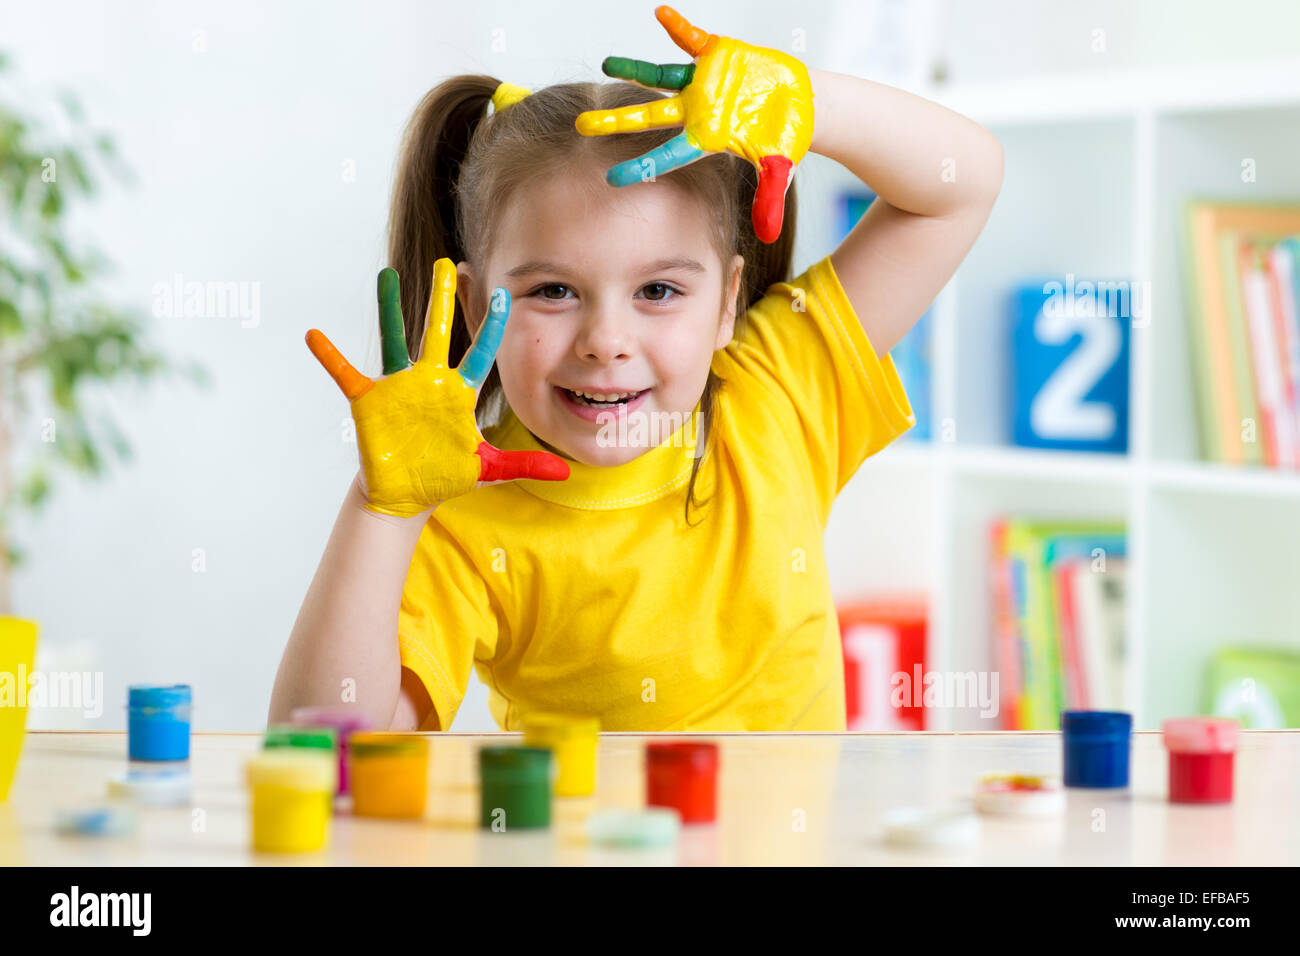 Funny little girl with hands painted in colorful paint Stock Photo